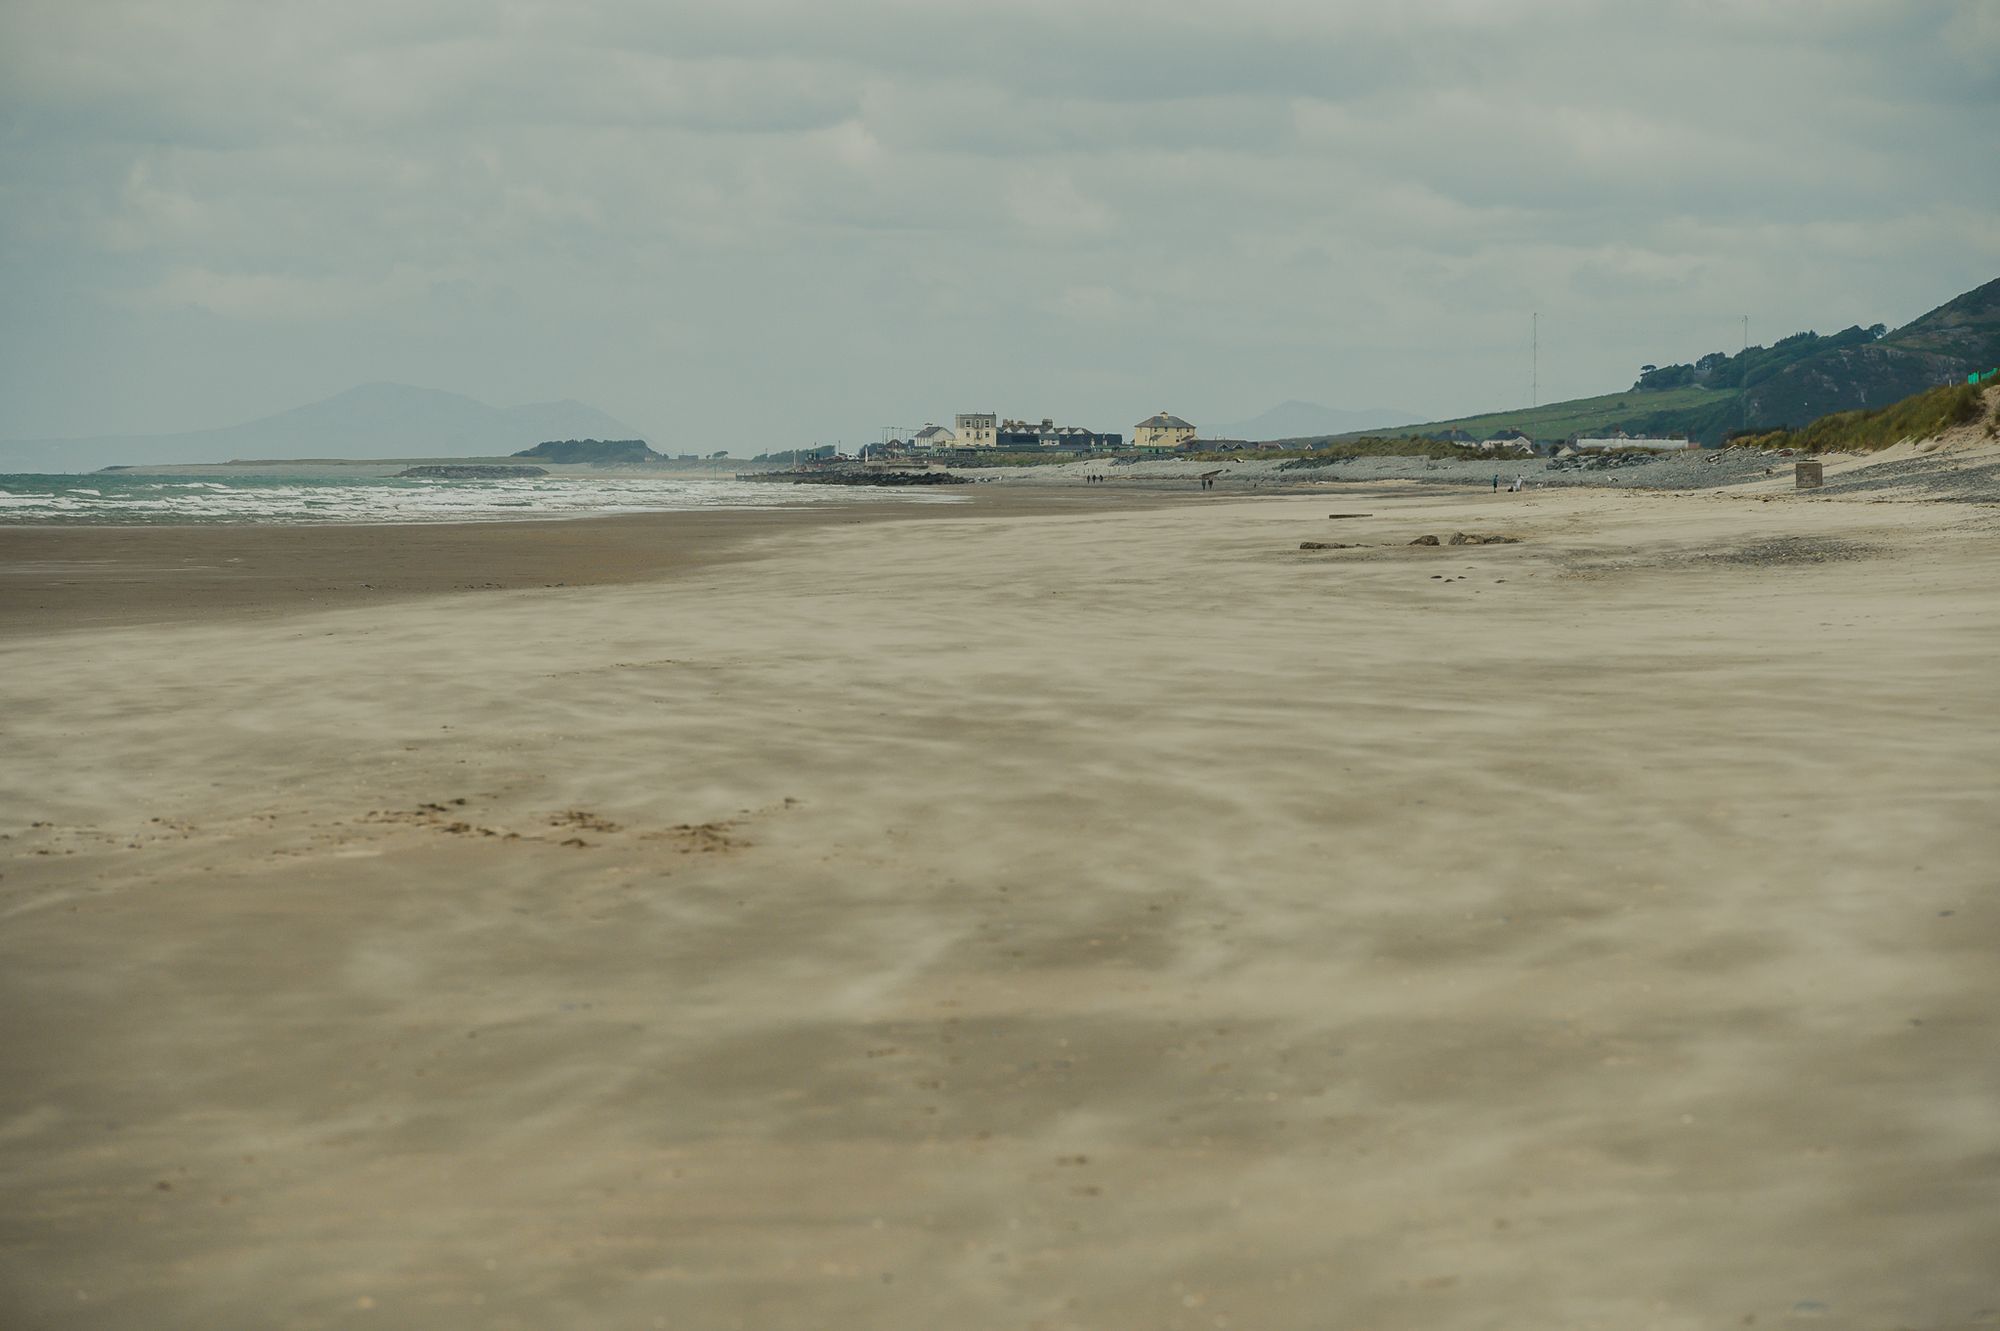 The wind is blowing sand along the beach on a cloudy day. There are buildings on the horizon and a mountain behind.